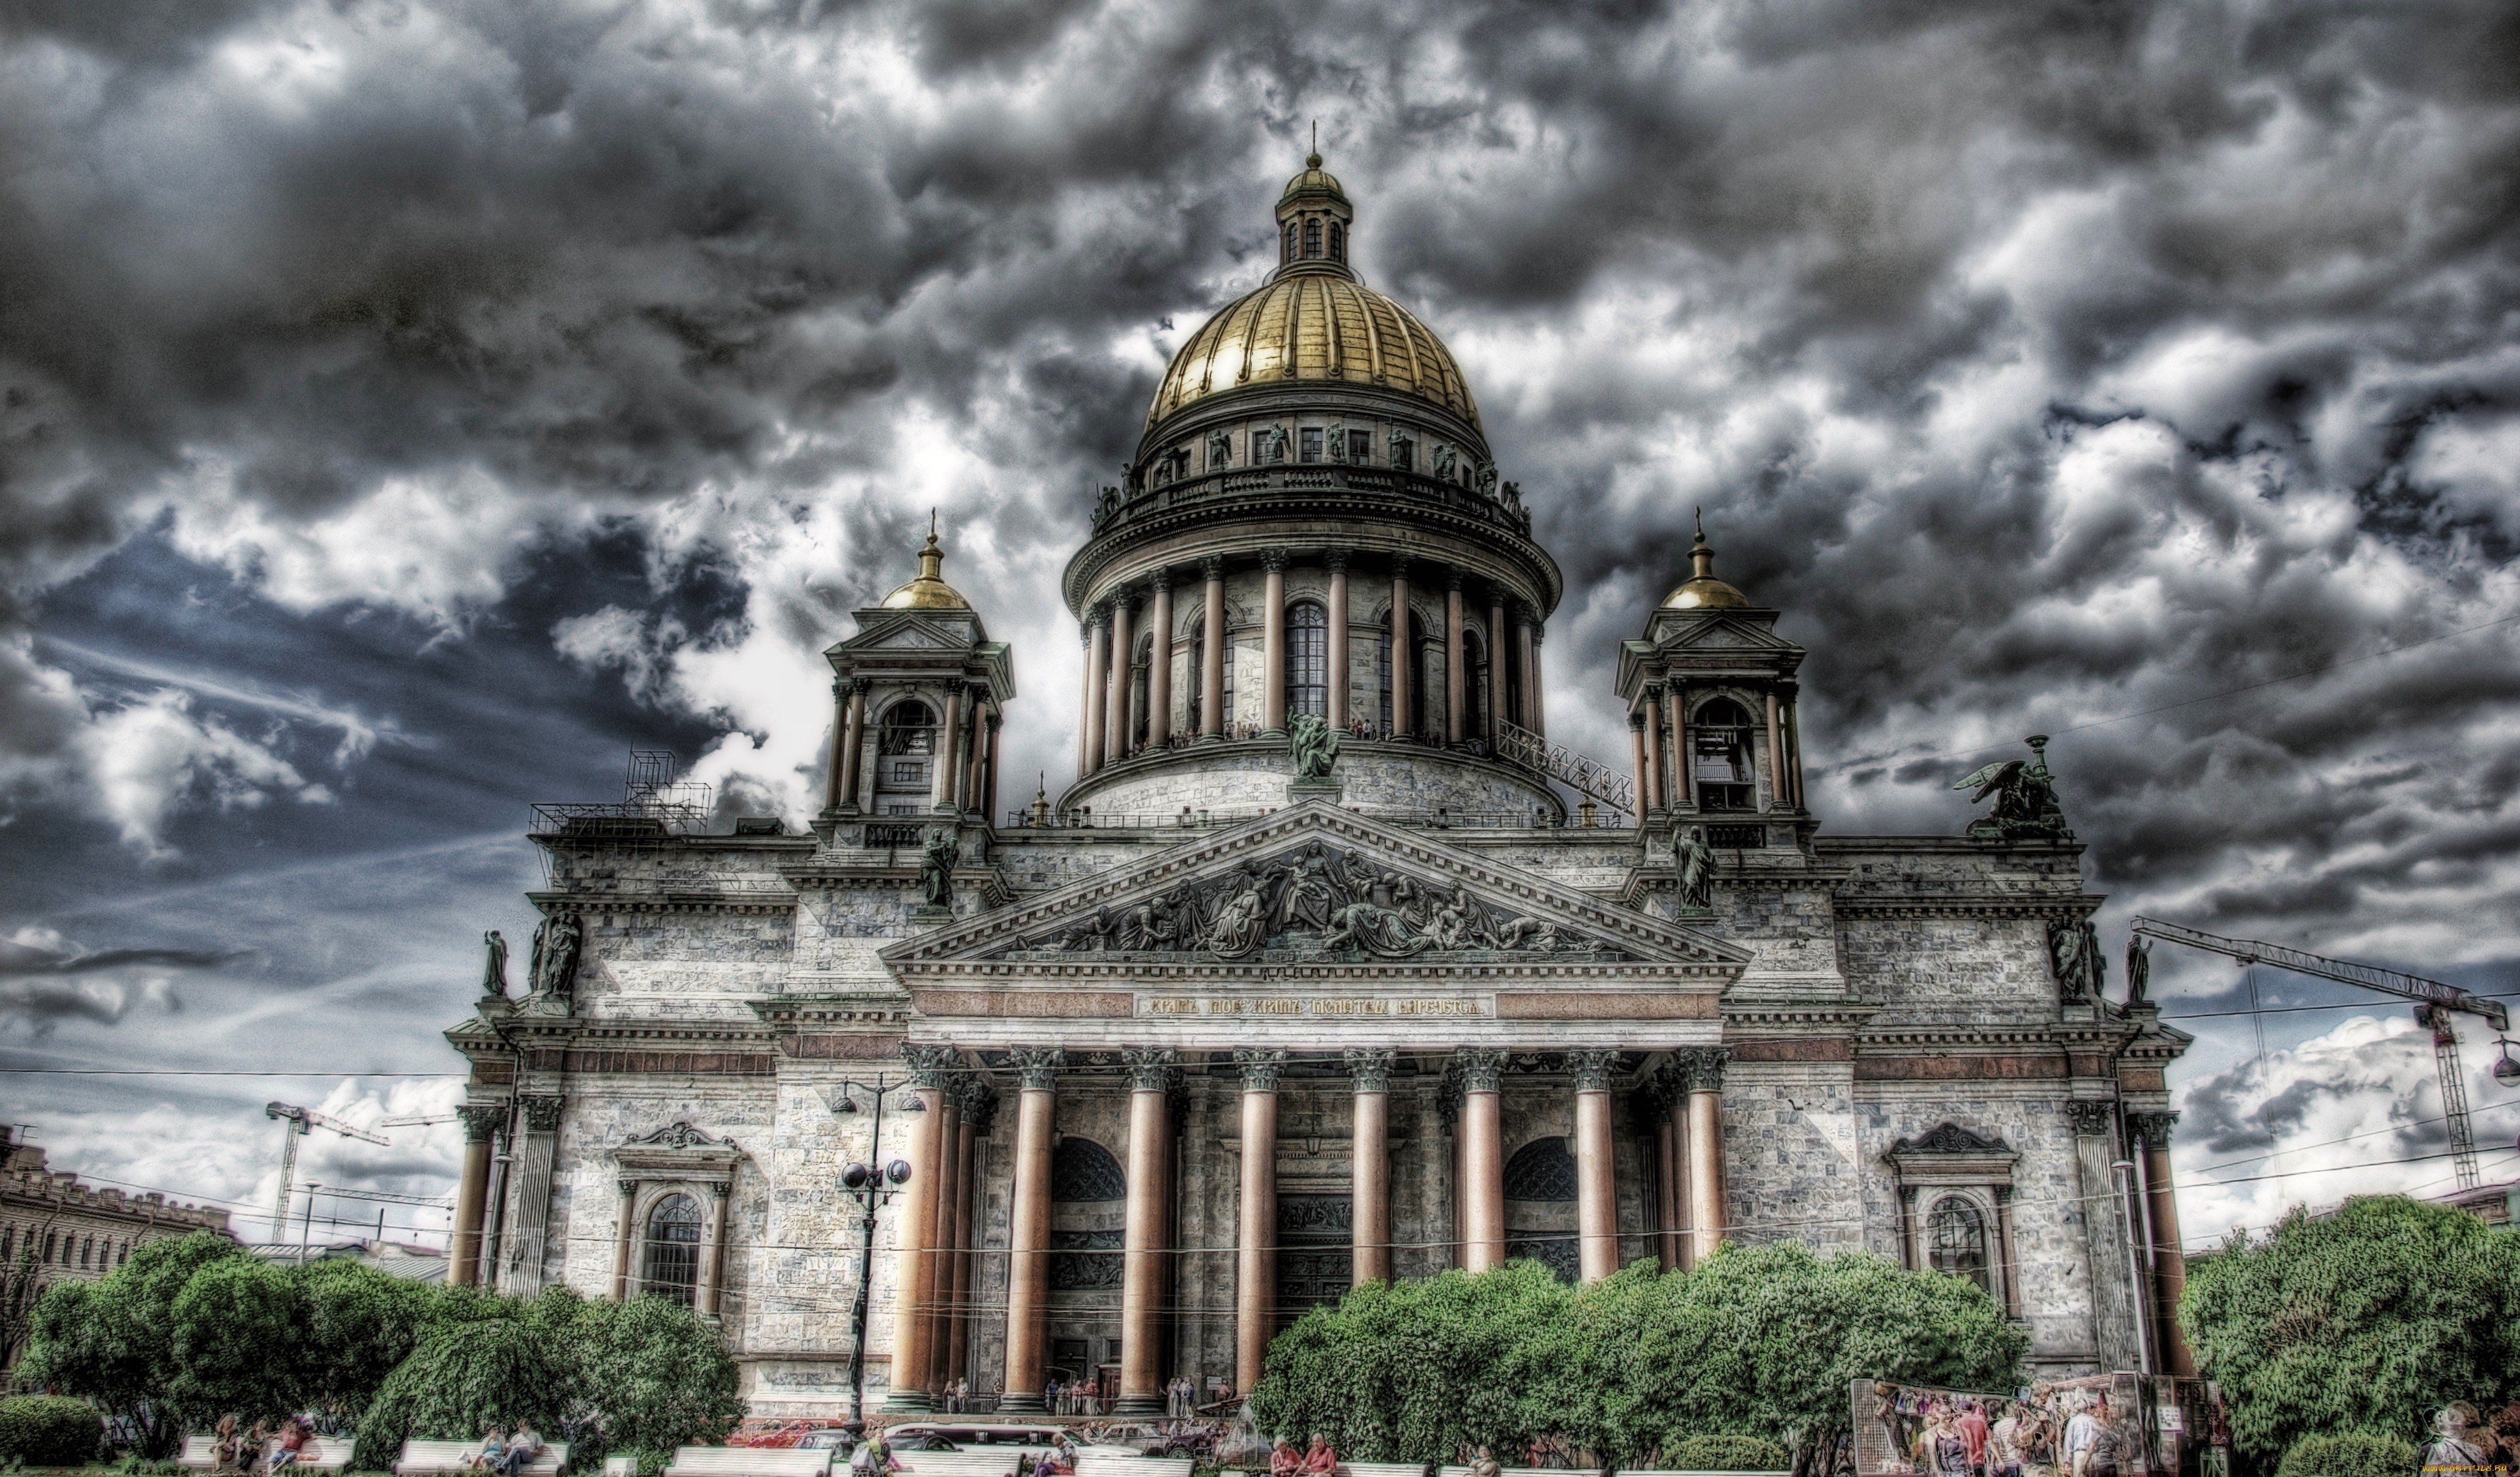 st, Petersburg, Russia, Clouds, Hdr, Saint, Isaacand039s, Cathedral, Cities Wallpaper